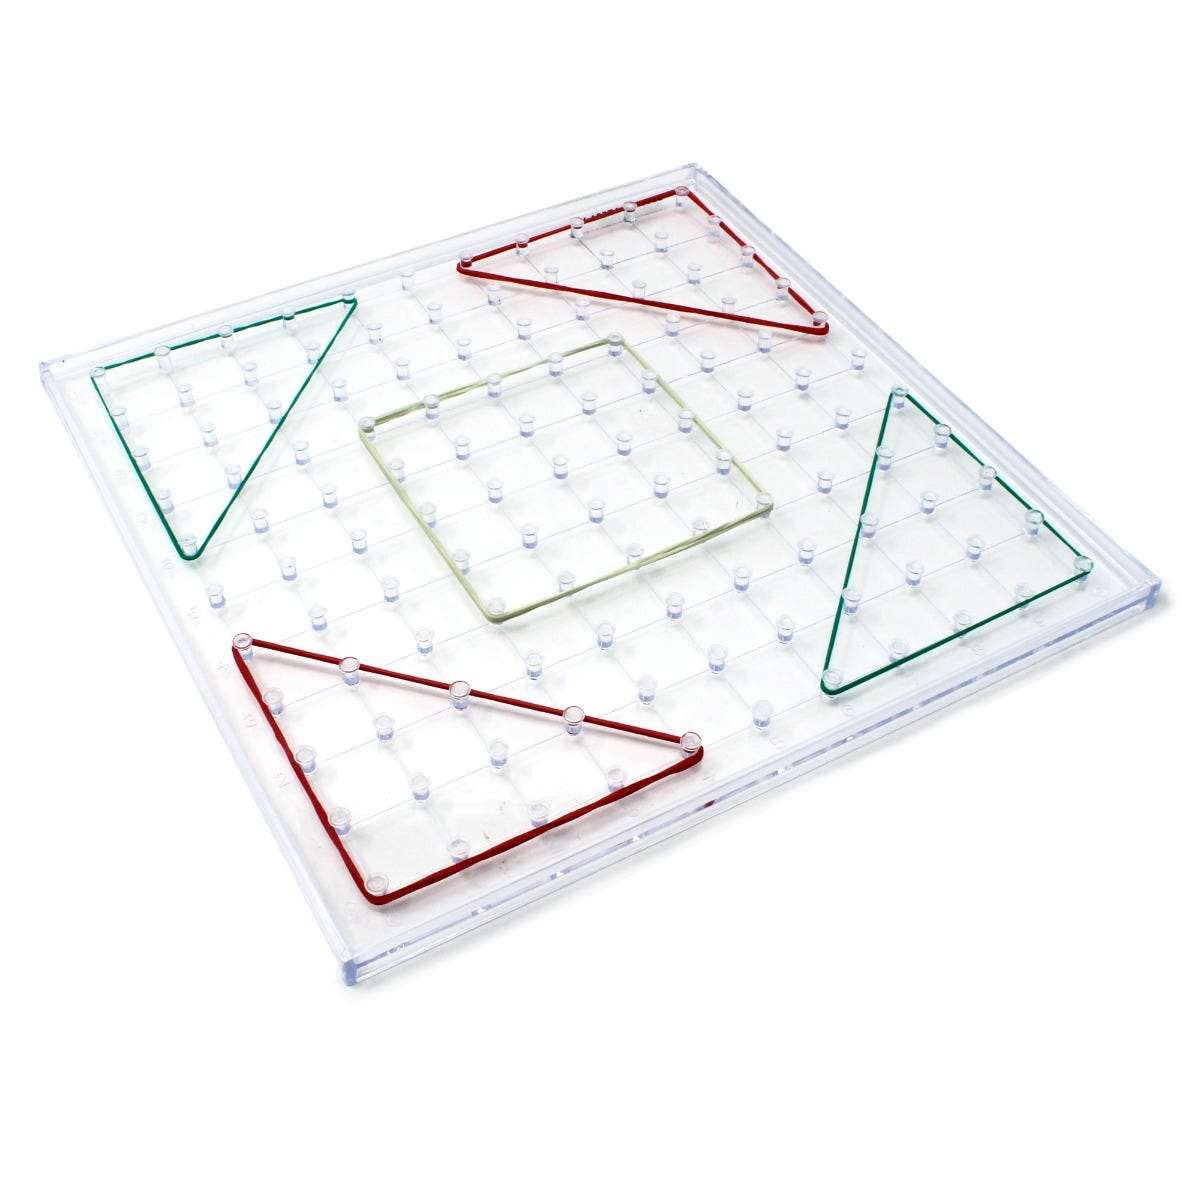 Transparent Geoboard, Geoboards are a visual way for children to grasp the basics of maths principles including geometry, symmetry, angles, fractions, and more through fun, hands-on learning activities. Made from durable transparent plastic, the 11 x 11 pin Transparent Geoboard is ideal for maths learning in the classroom and at home. Use the included colourful elastic bands, and add your own for even more creative maths fun. Grab an elastic band and start learning about angles, shapes, geometry and more! T